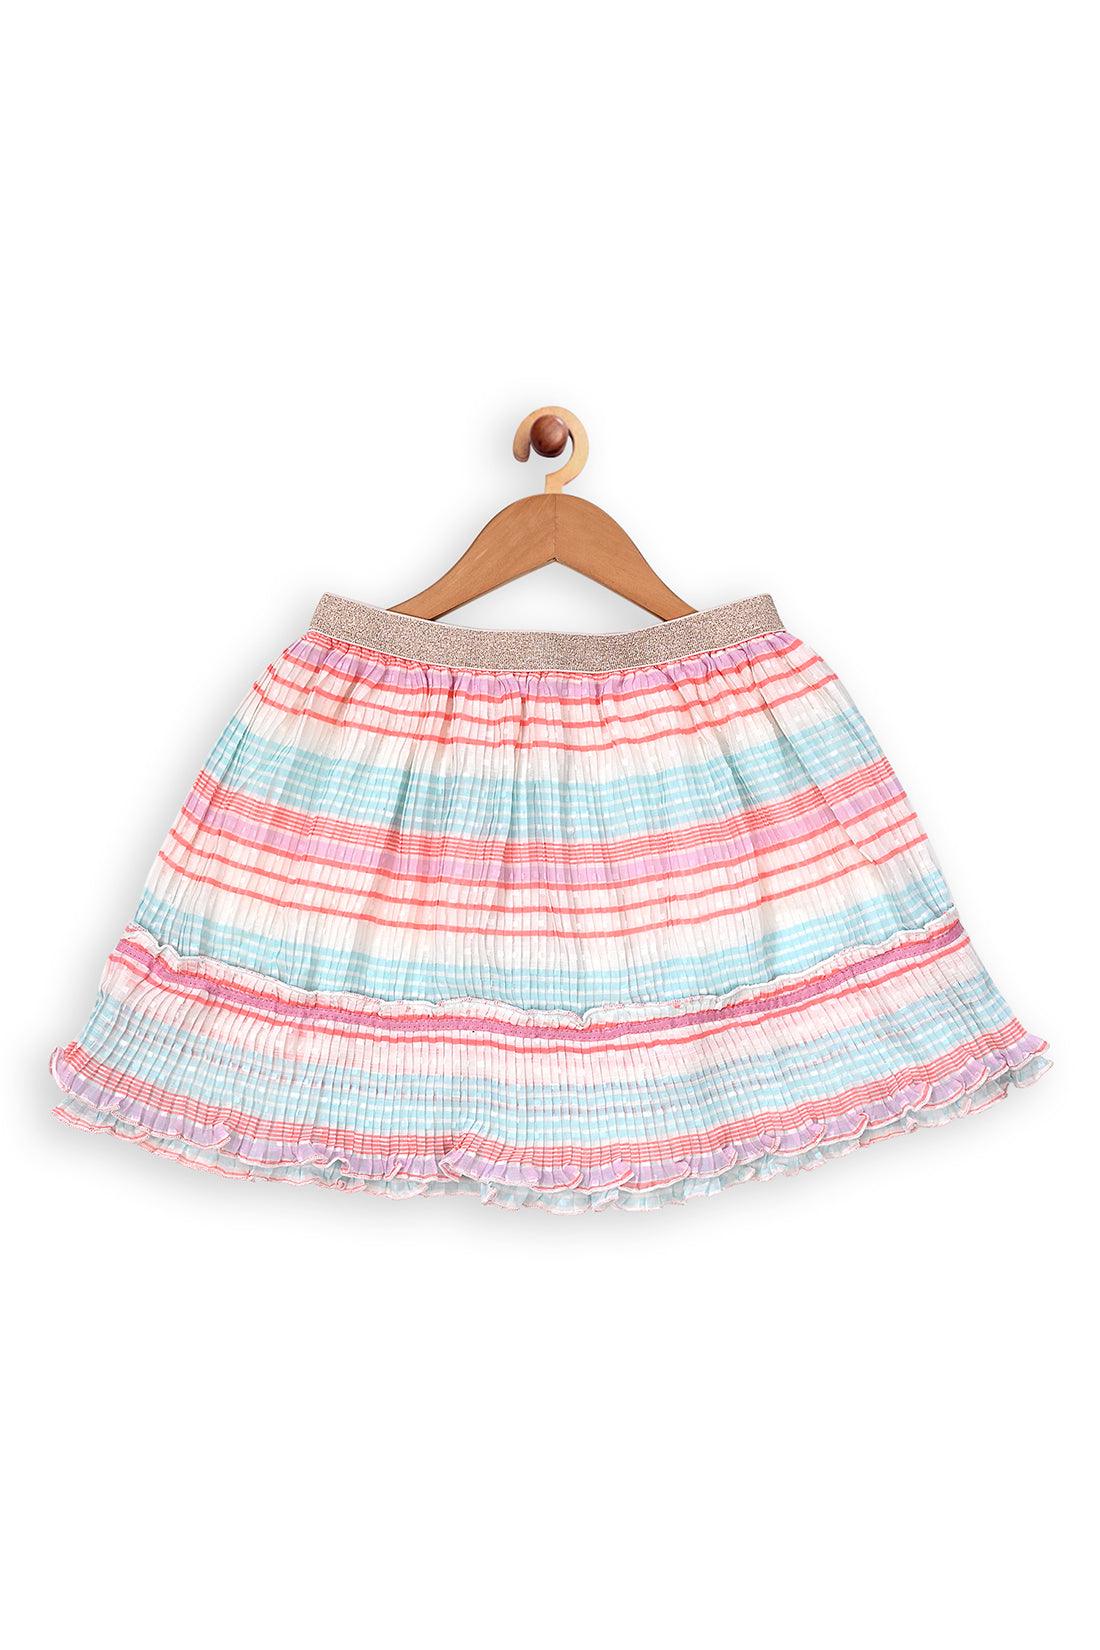 One Friday Kids Girls Multicolor Pleated Skirt